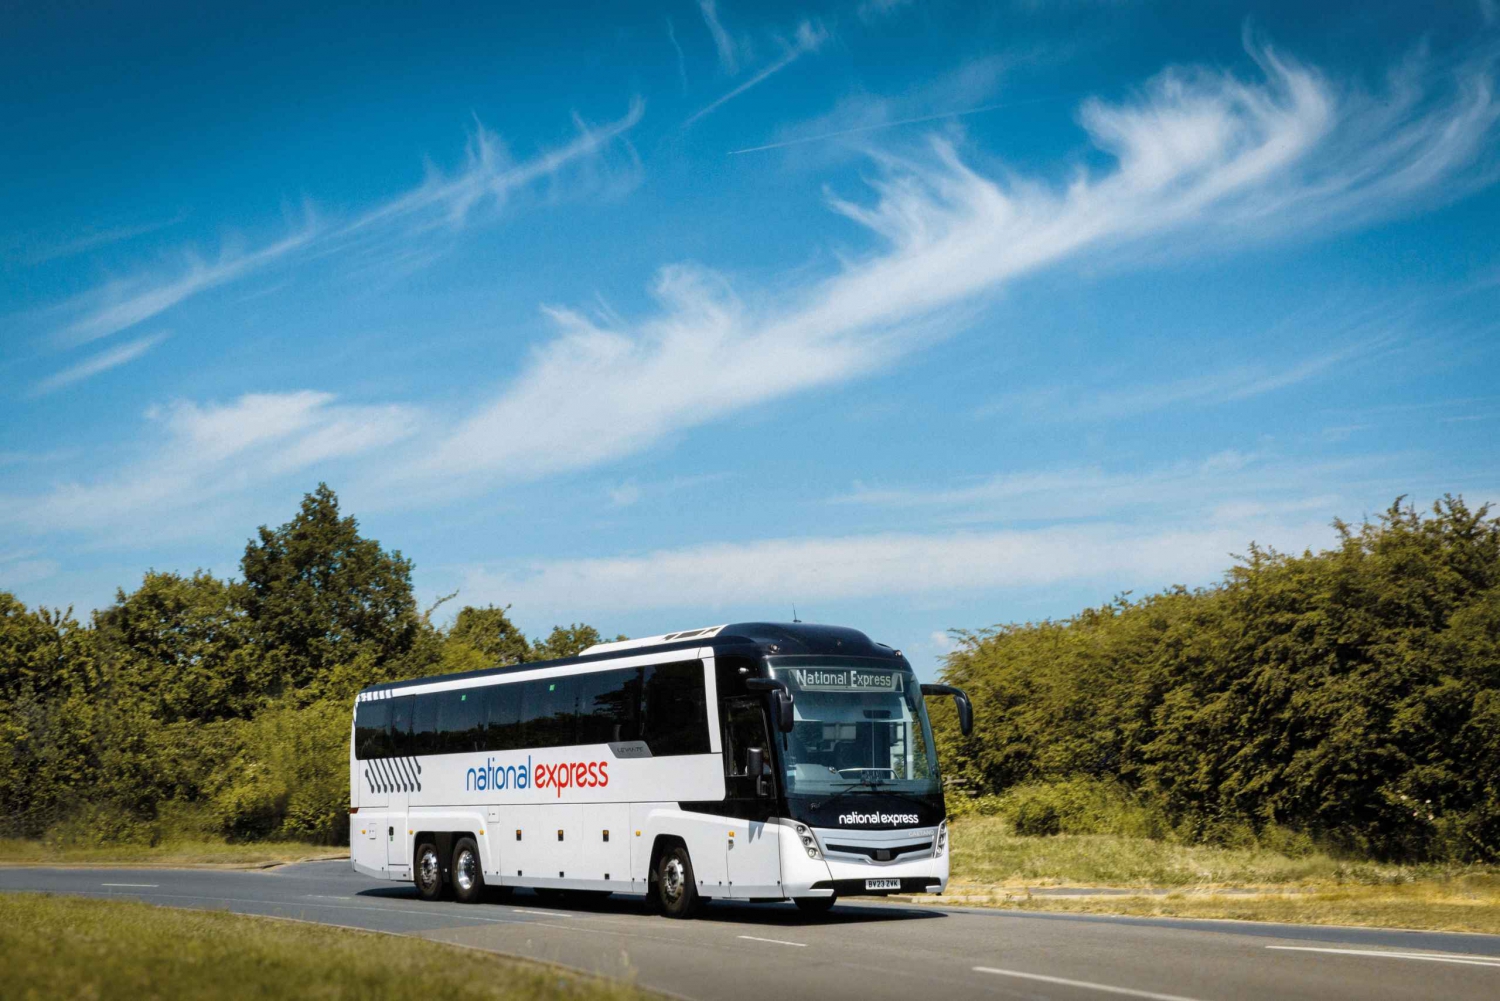 Bus Transfer between Heathrow and Gatwick Airports